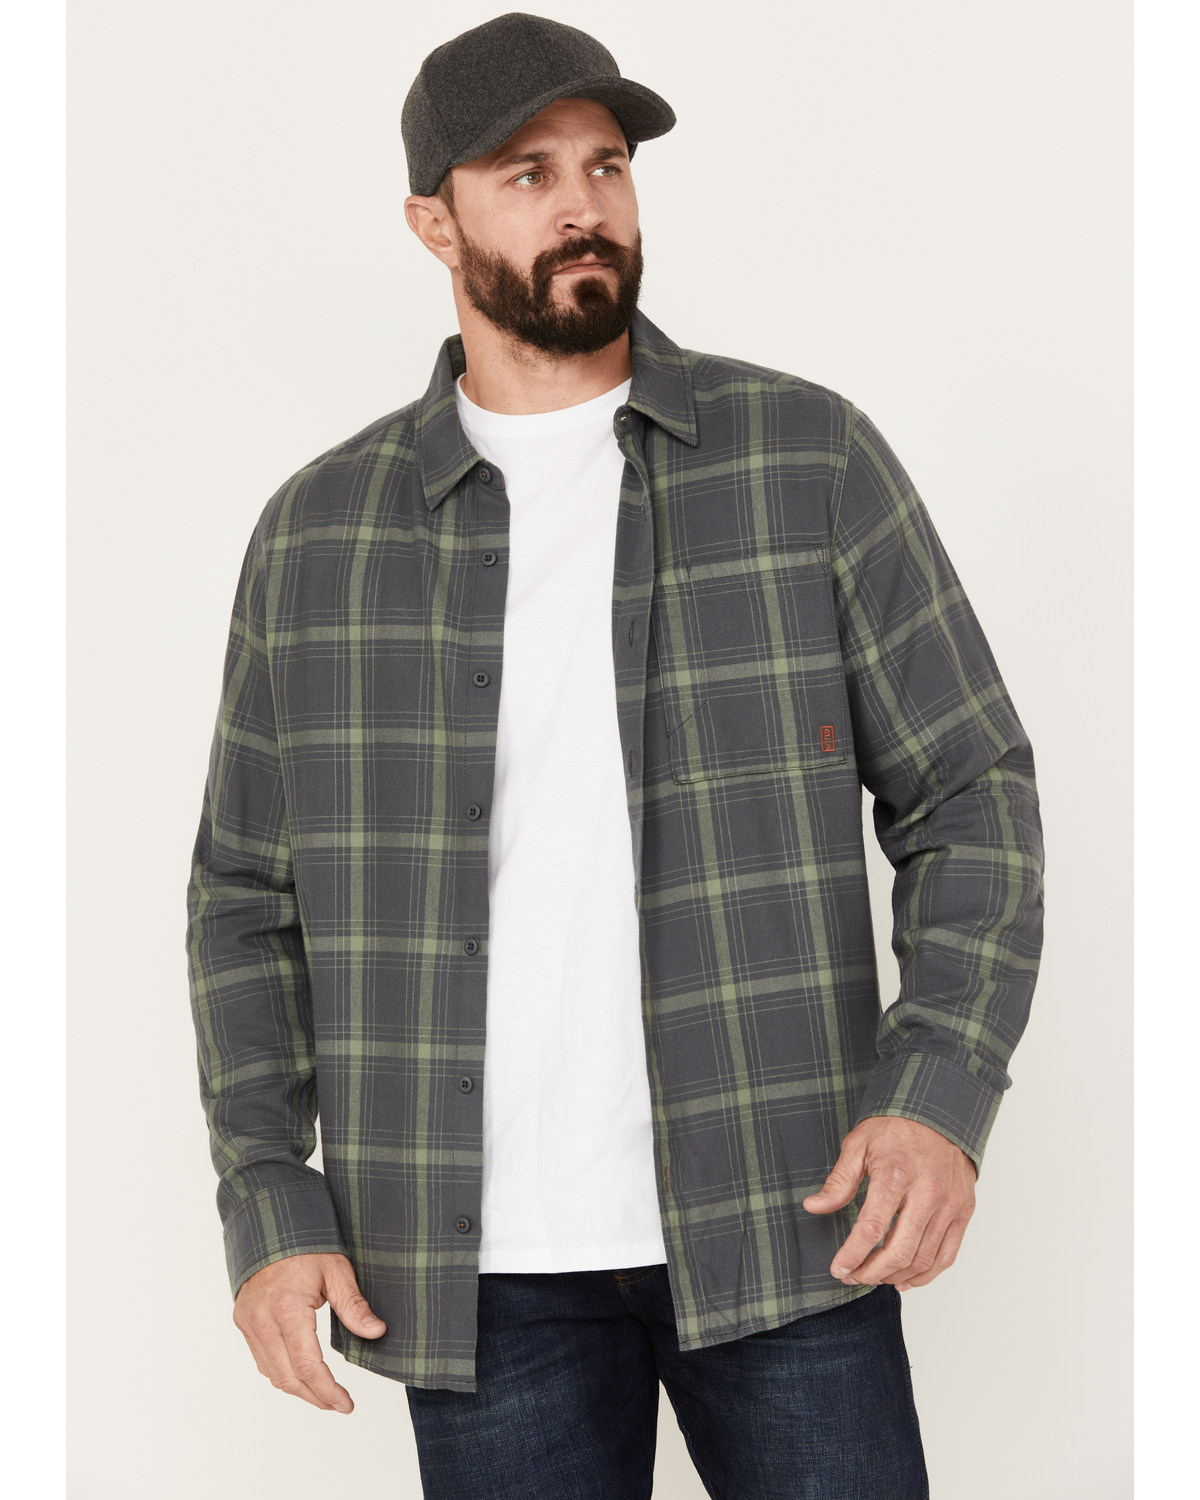 Brothers and Sons Men's Casual Plaid Print Long Sleeve Button-Down Western Flannel Shirt